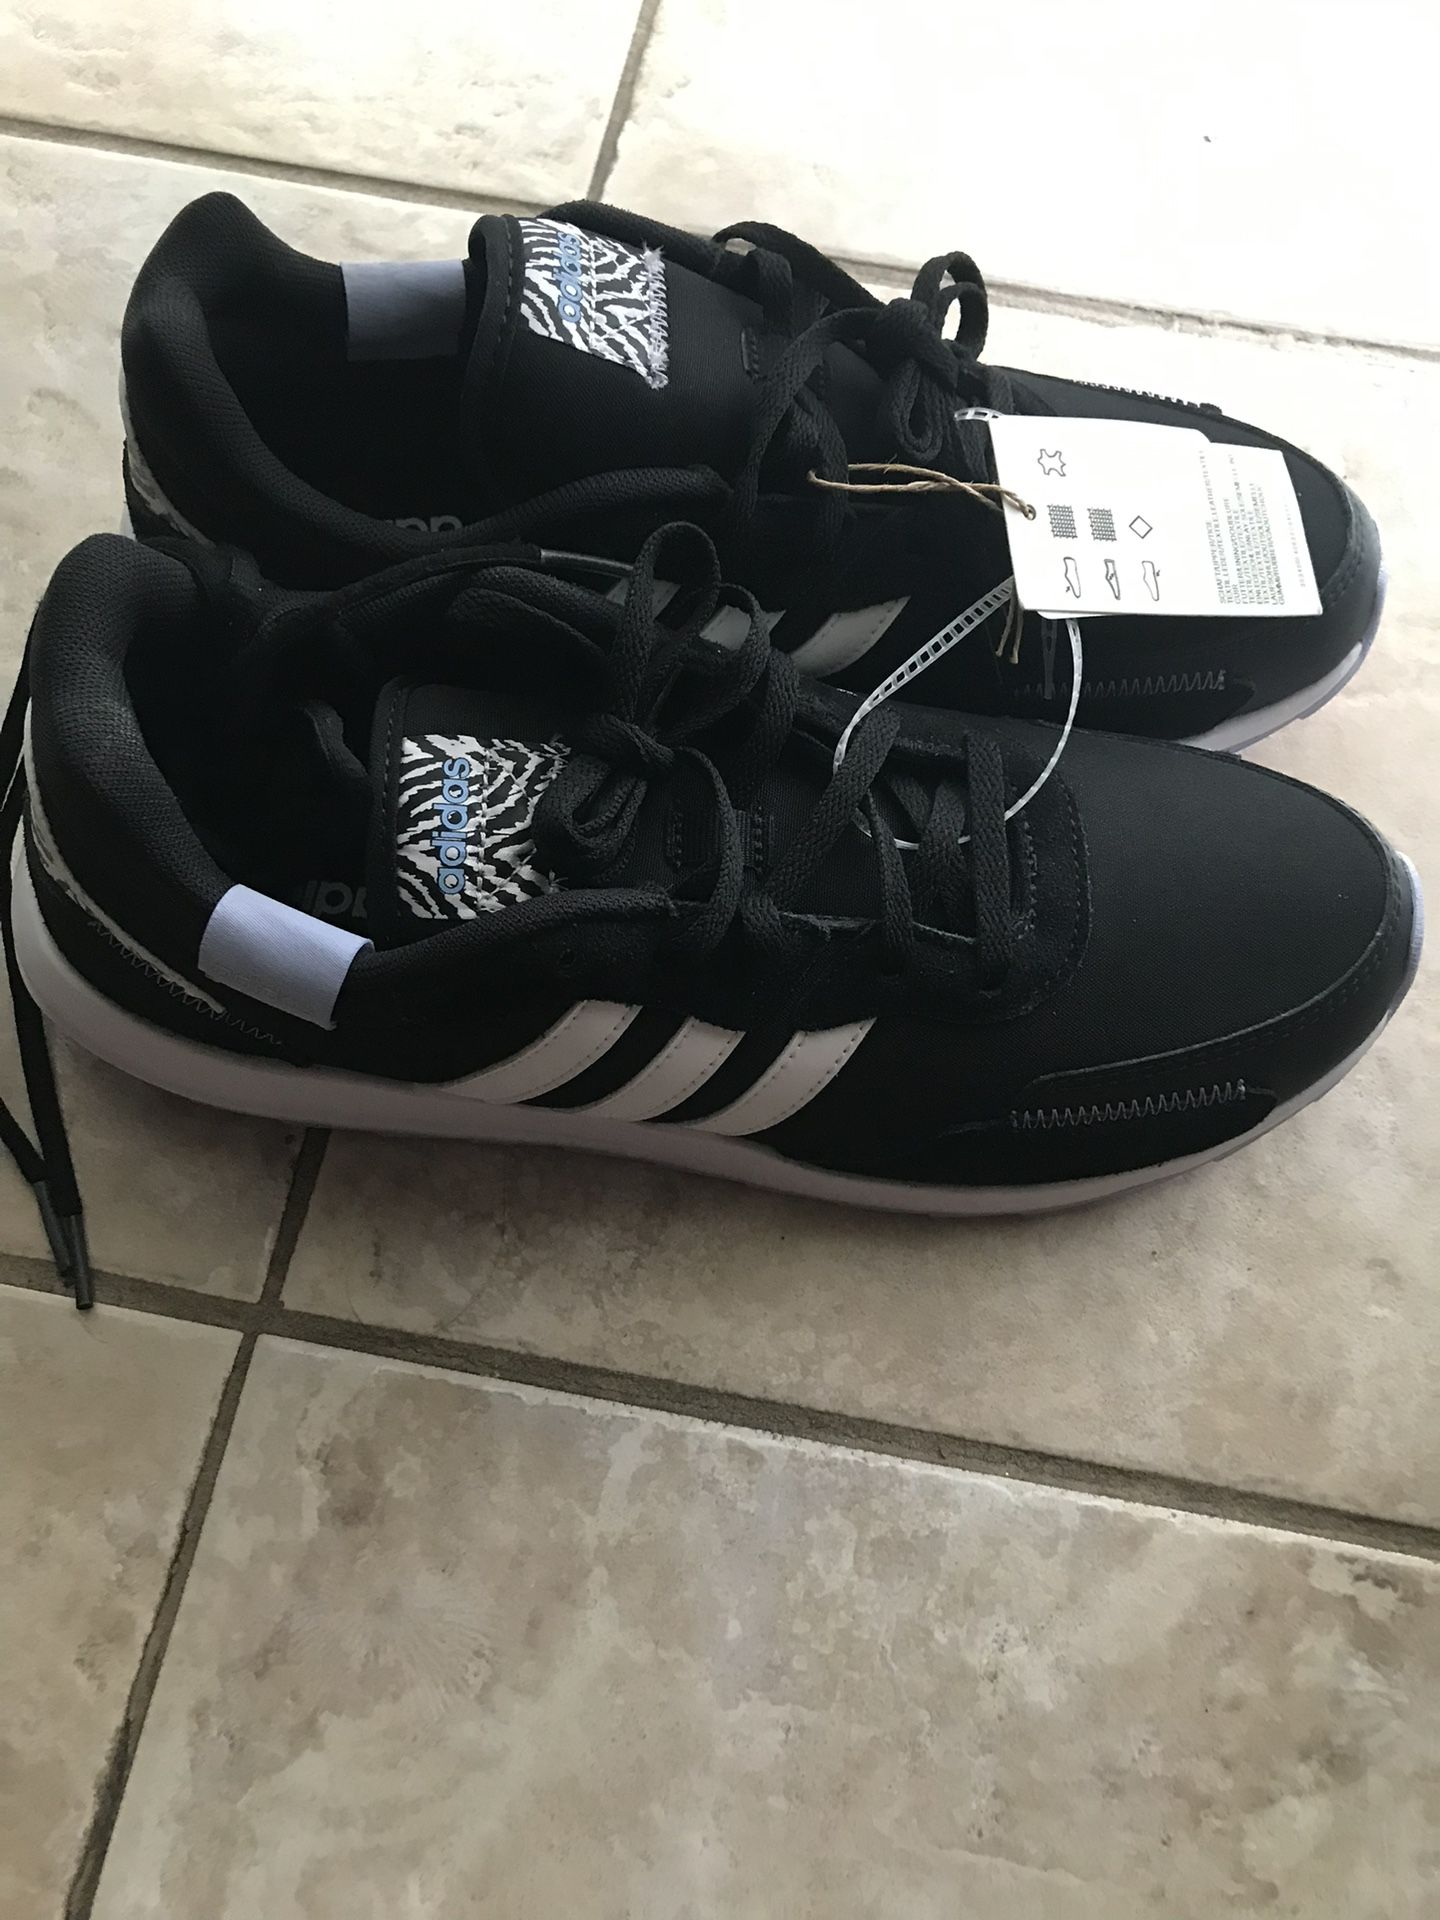 Adidas Women’s Shoes Size 10